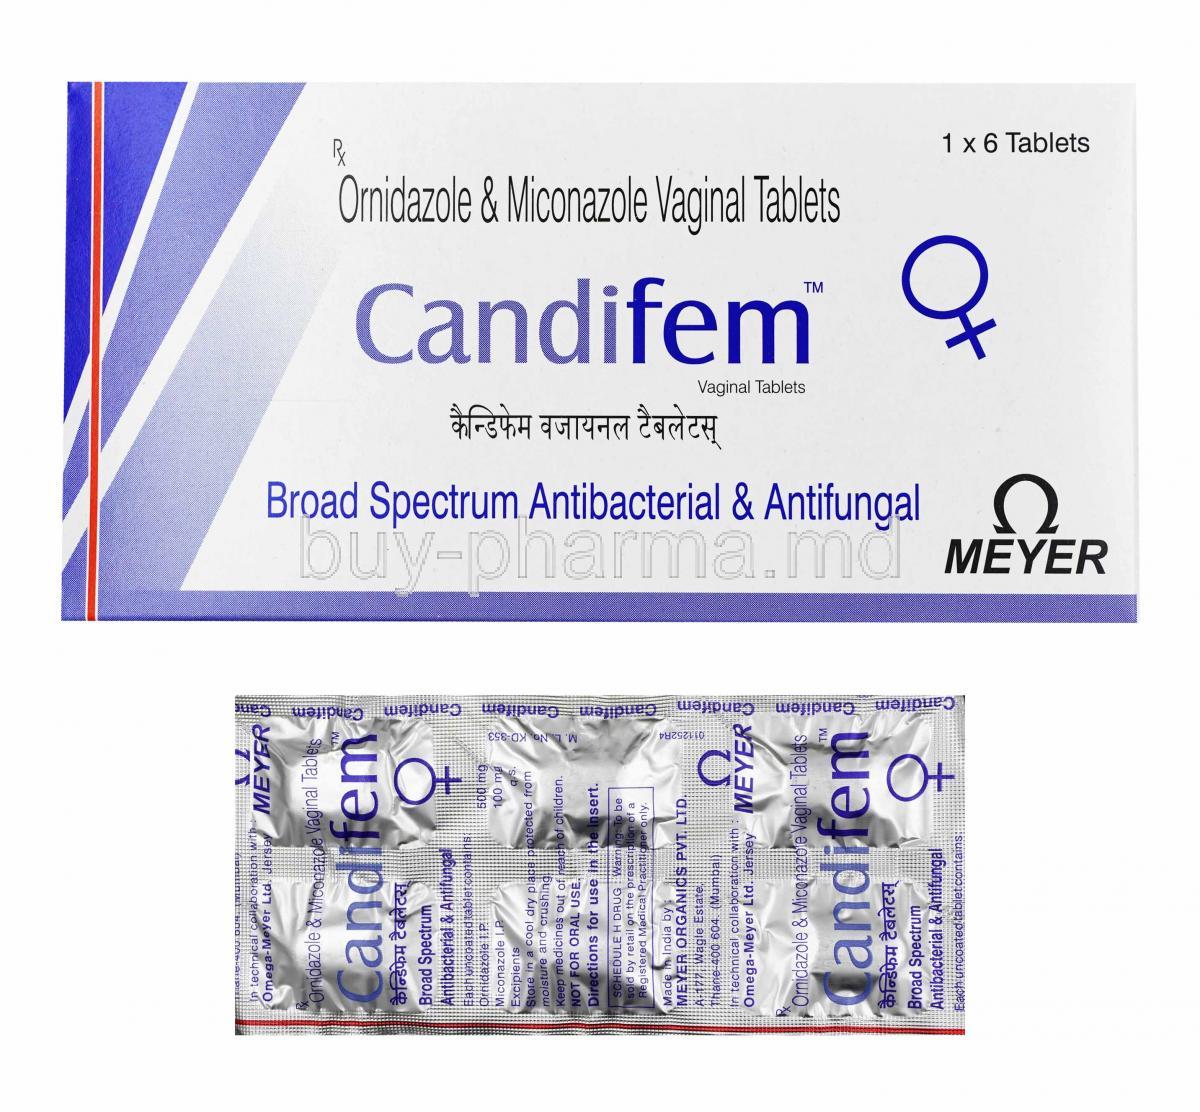 Candifem, Miconazole and Ornidazole box and tablets